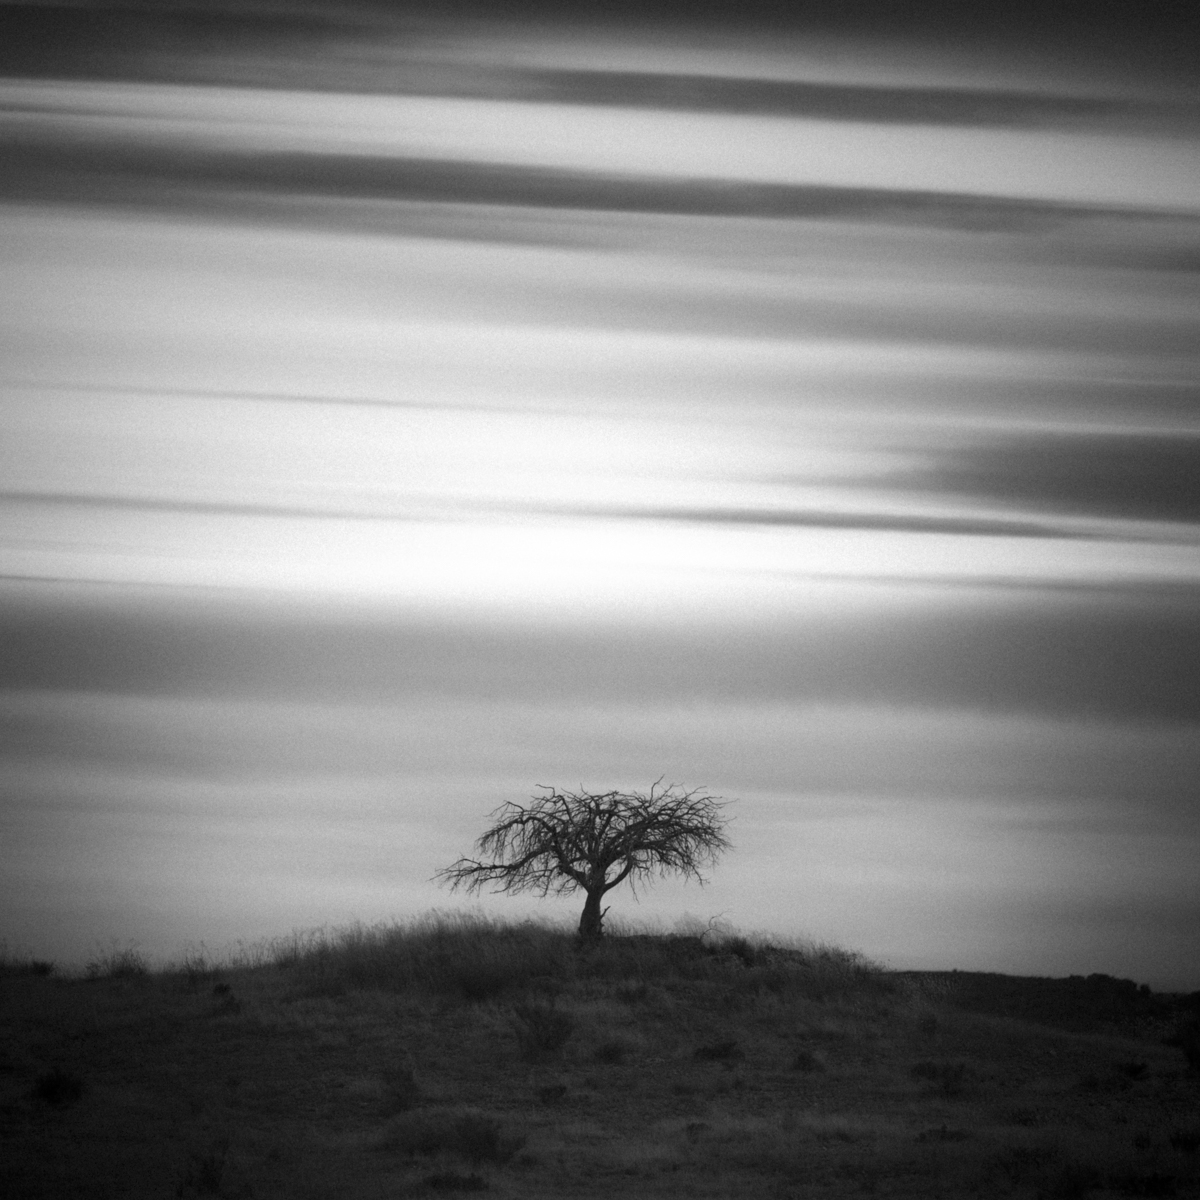 Mesquitte Tree Along RR 2810 Near Marfa, 2019, Mabry Campbell